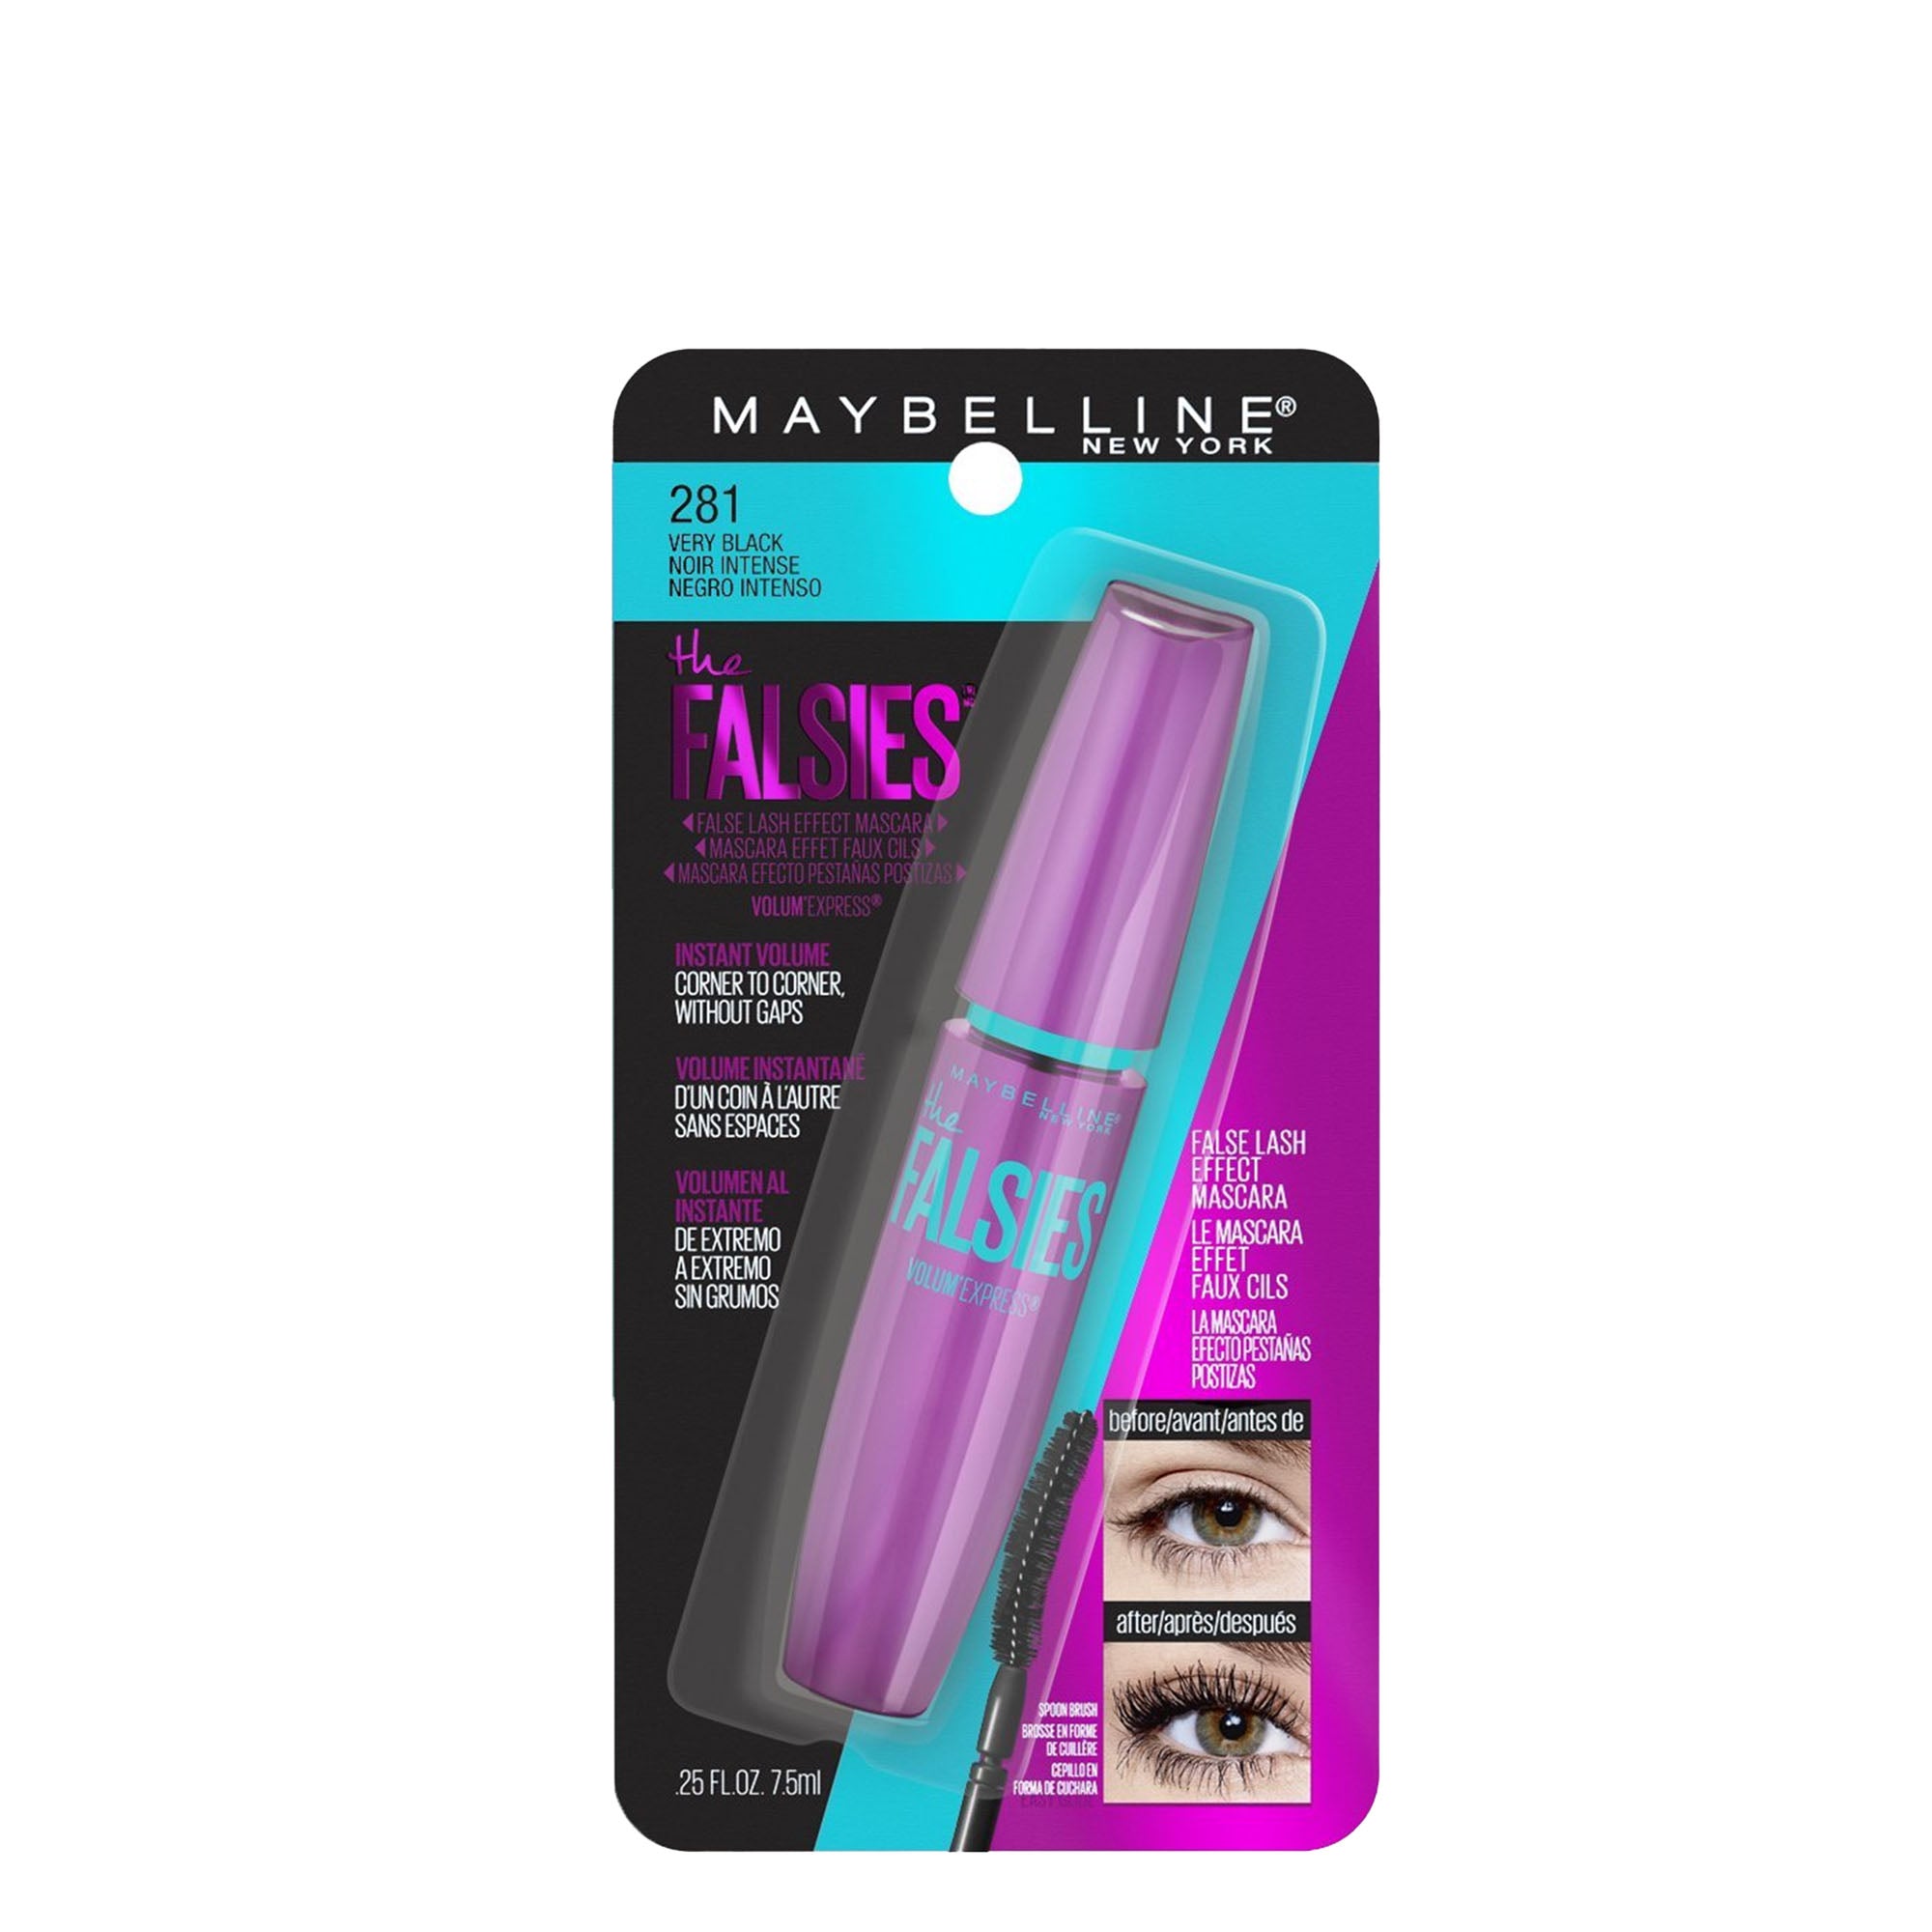 Maybelline The Falsies 281 Negro Intenso Maybelline